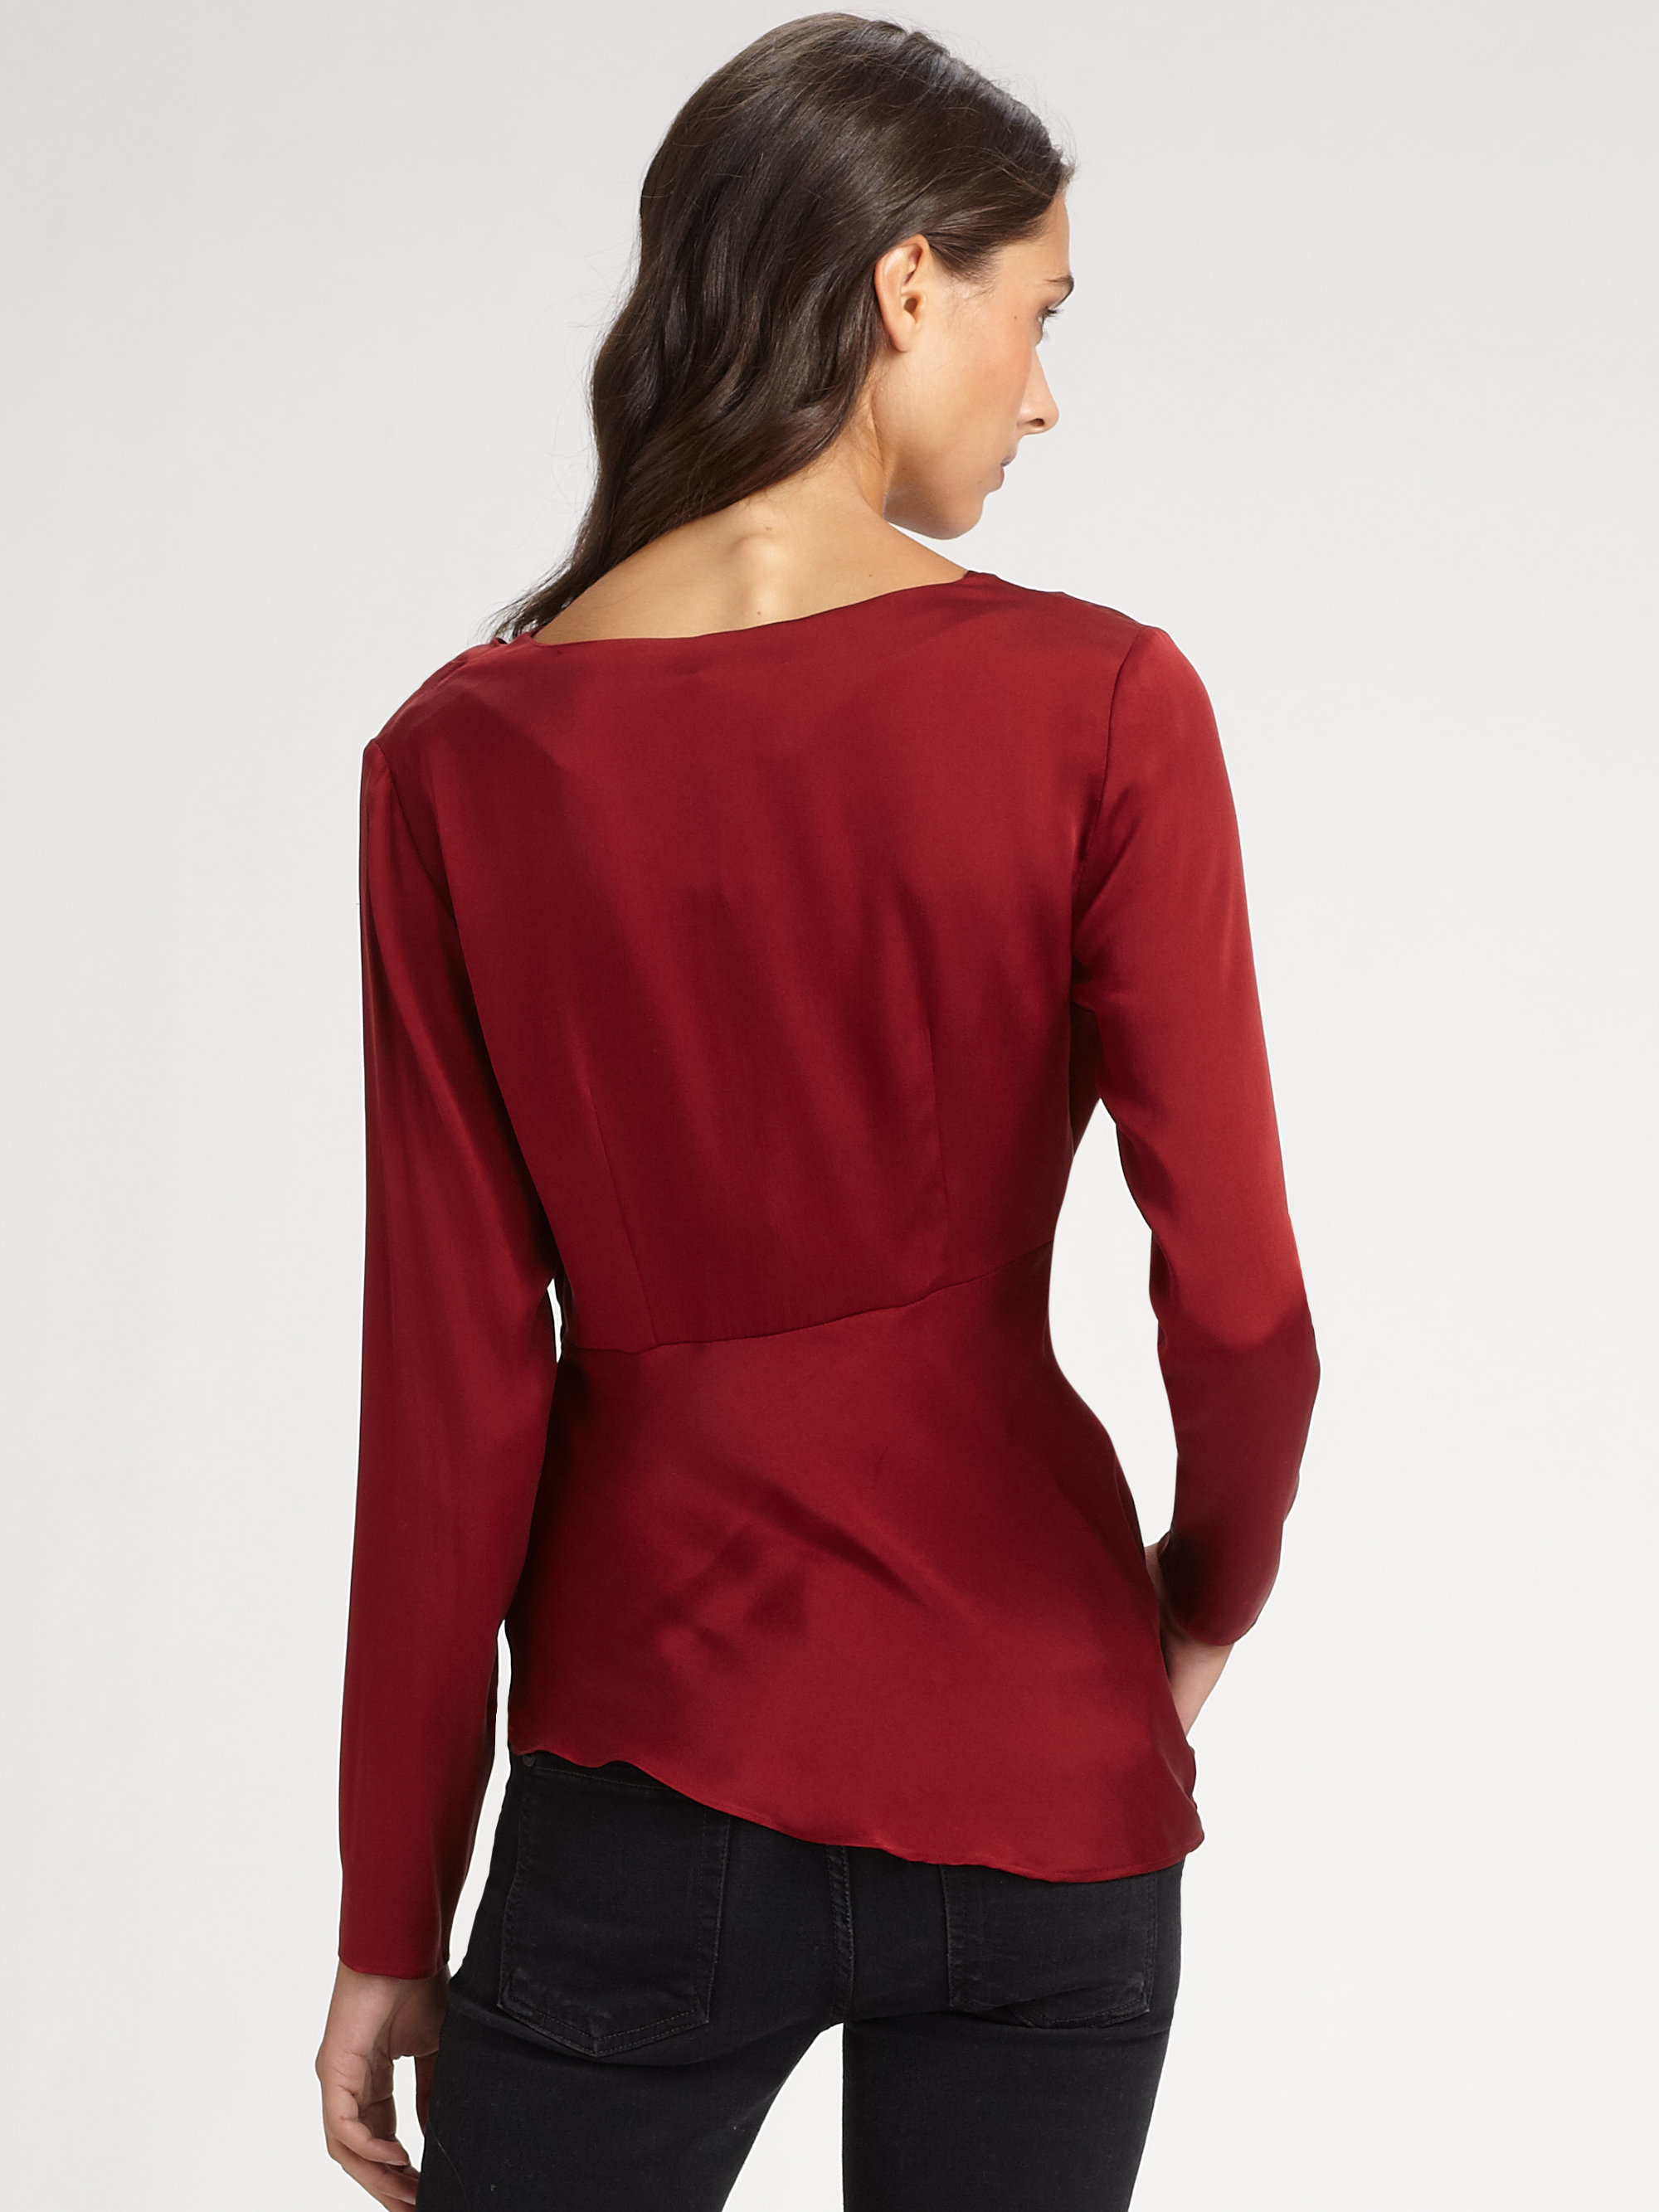 Lyst - Catherine malandrino Knot Blouse in Red